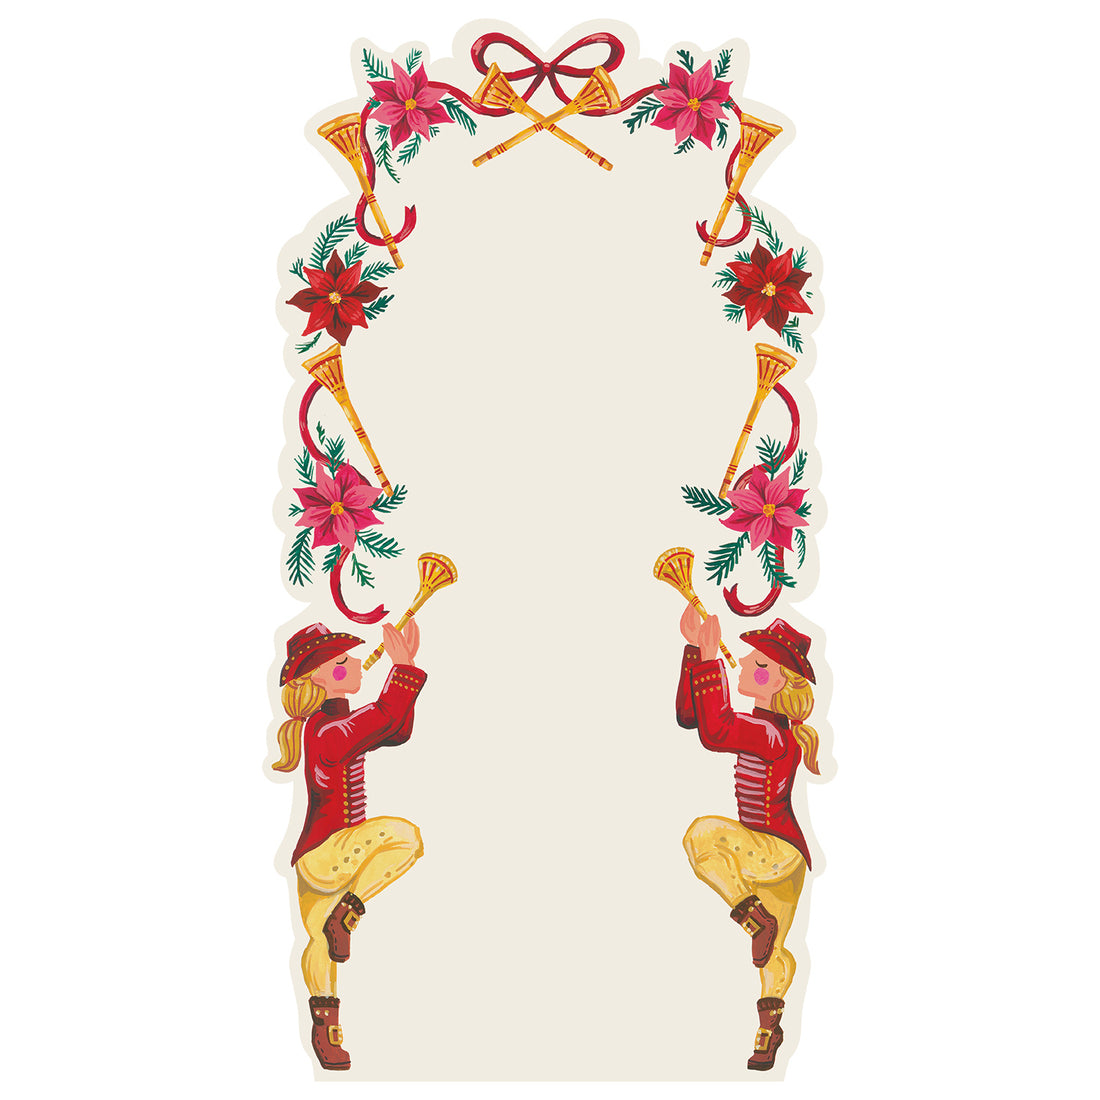 A die-cut card bordered with whimsical illustrations; on either side of the bottom are two people in vintage marching band outfits playing horns, and surrounding the upper part of the card is a repeating pattern of horns, poinsettia blooms, and red ribbon tied in a bow at the top.